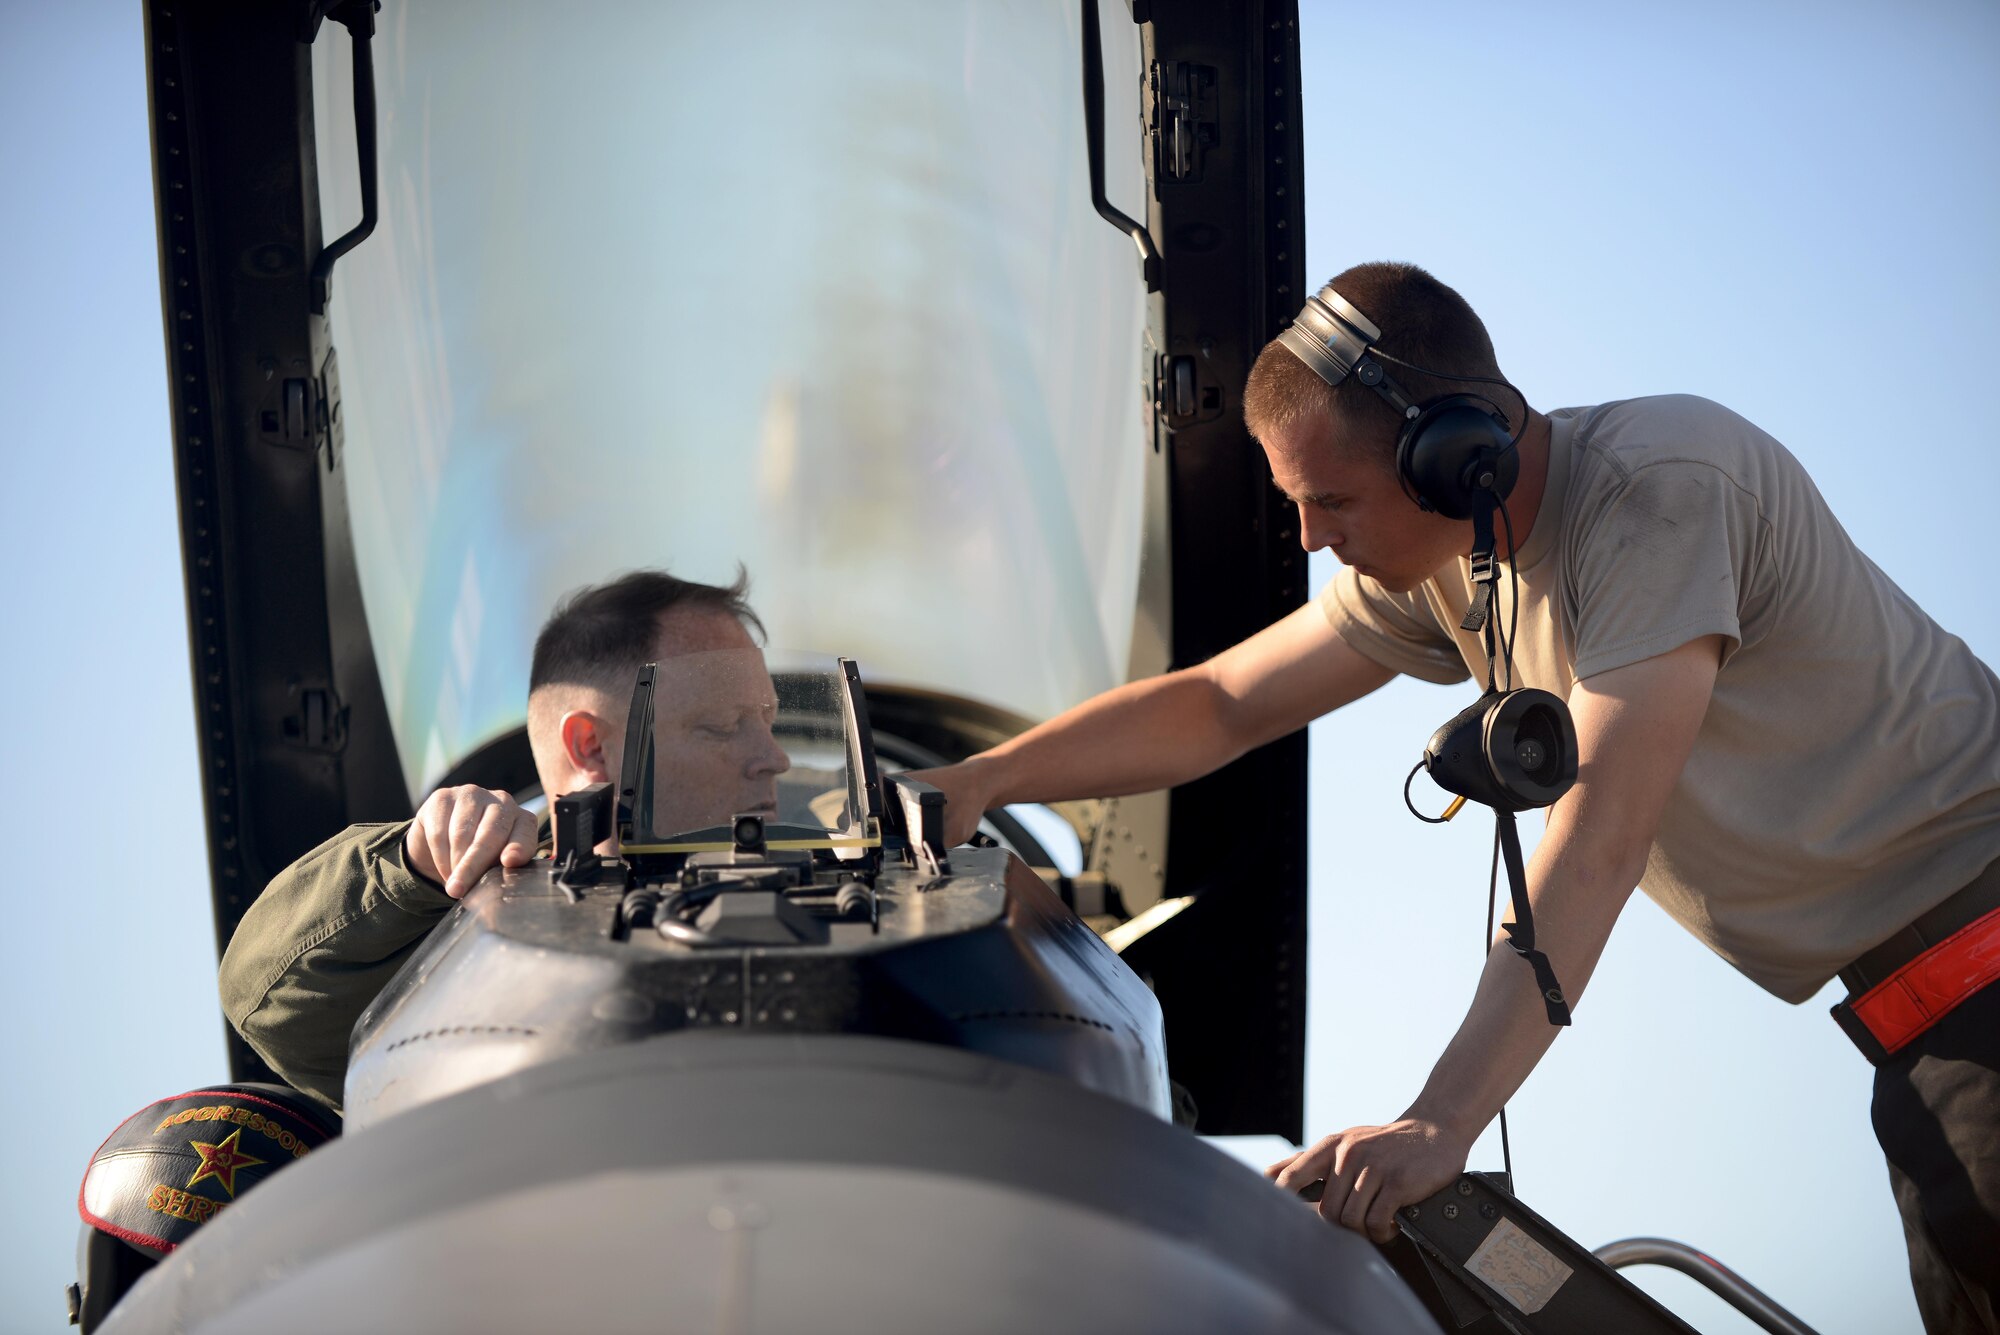 U.S. Air Force Airman 1st Class Michael Brinkmeyer (left), an F-16 Fighting Falcon assistant dedicated crew chief with the18th Aircraft Maintenance Unit, secures U.S. Air Force Maj. Scott Meng, 18th Aggressor Squadron F-16 Fighting Falcon pilot, during RED FLAG-Alaska 16-2, on Eielson Air Force Base, Alaska, June 15, 2016. (U.S. Air Force photo by Tech. Sgt. Steven R. Doty)